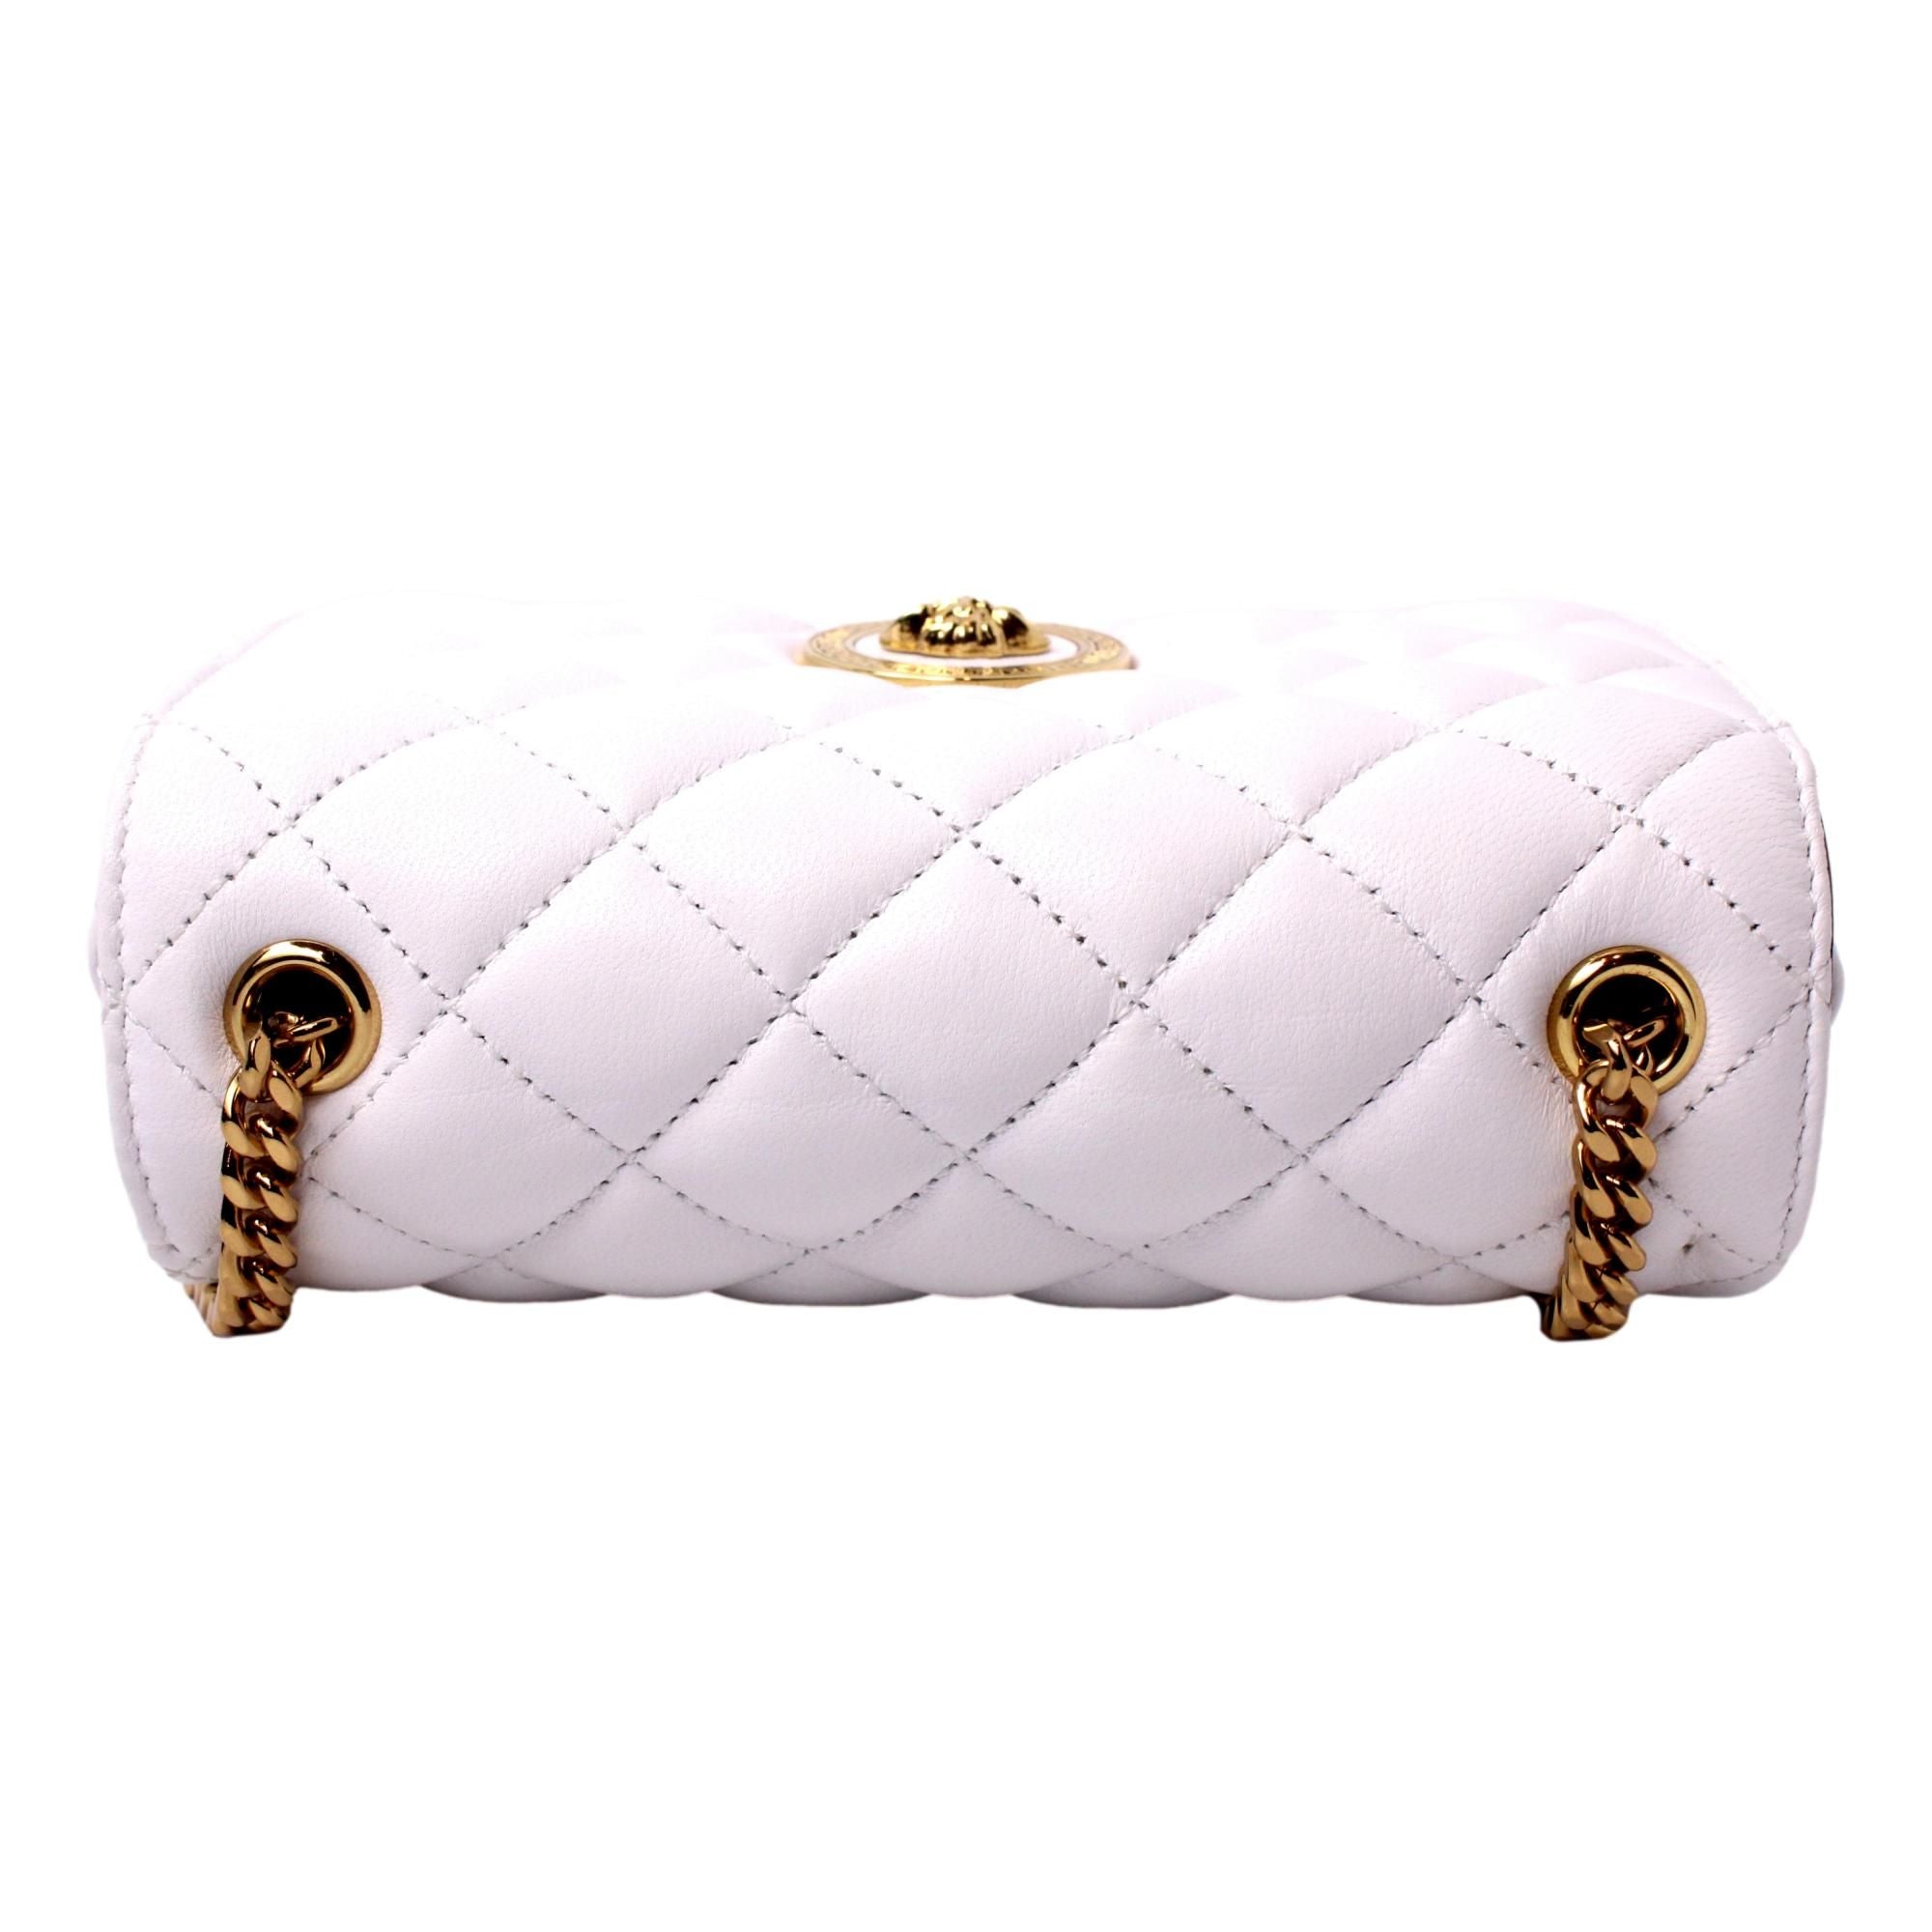 Versace La Medusa Quilted White Lambskin Leather Crossbody Shoulder Bag at_Queen_Bee_of_Beverly_Hills